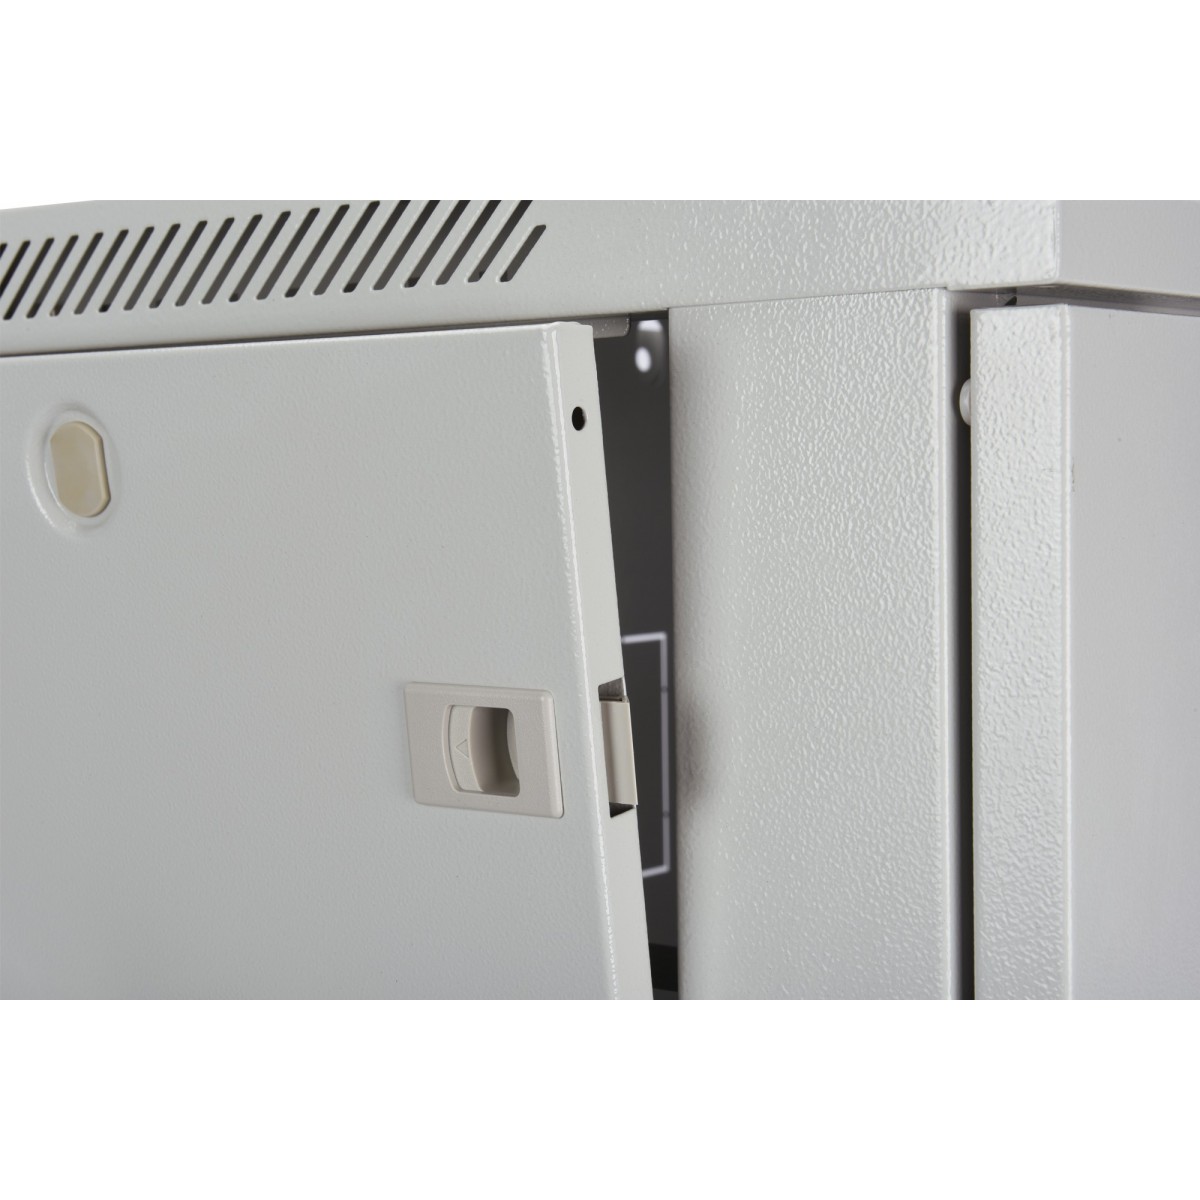 DIGITUS Wall Mounting Cabinets Dynamic Basic Series - 600x450 mm (WxD)